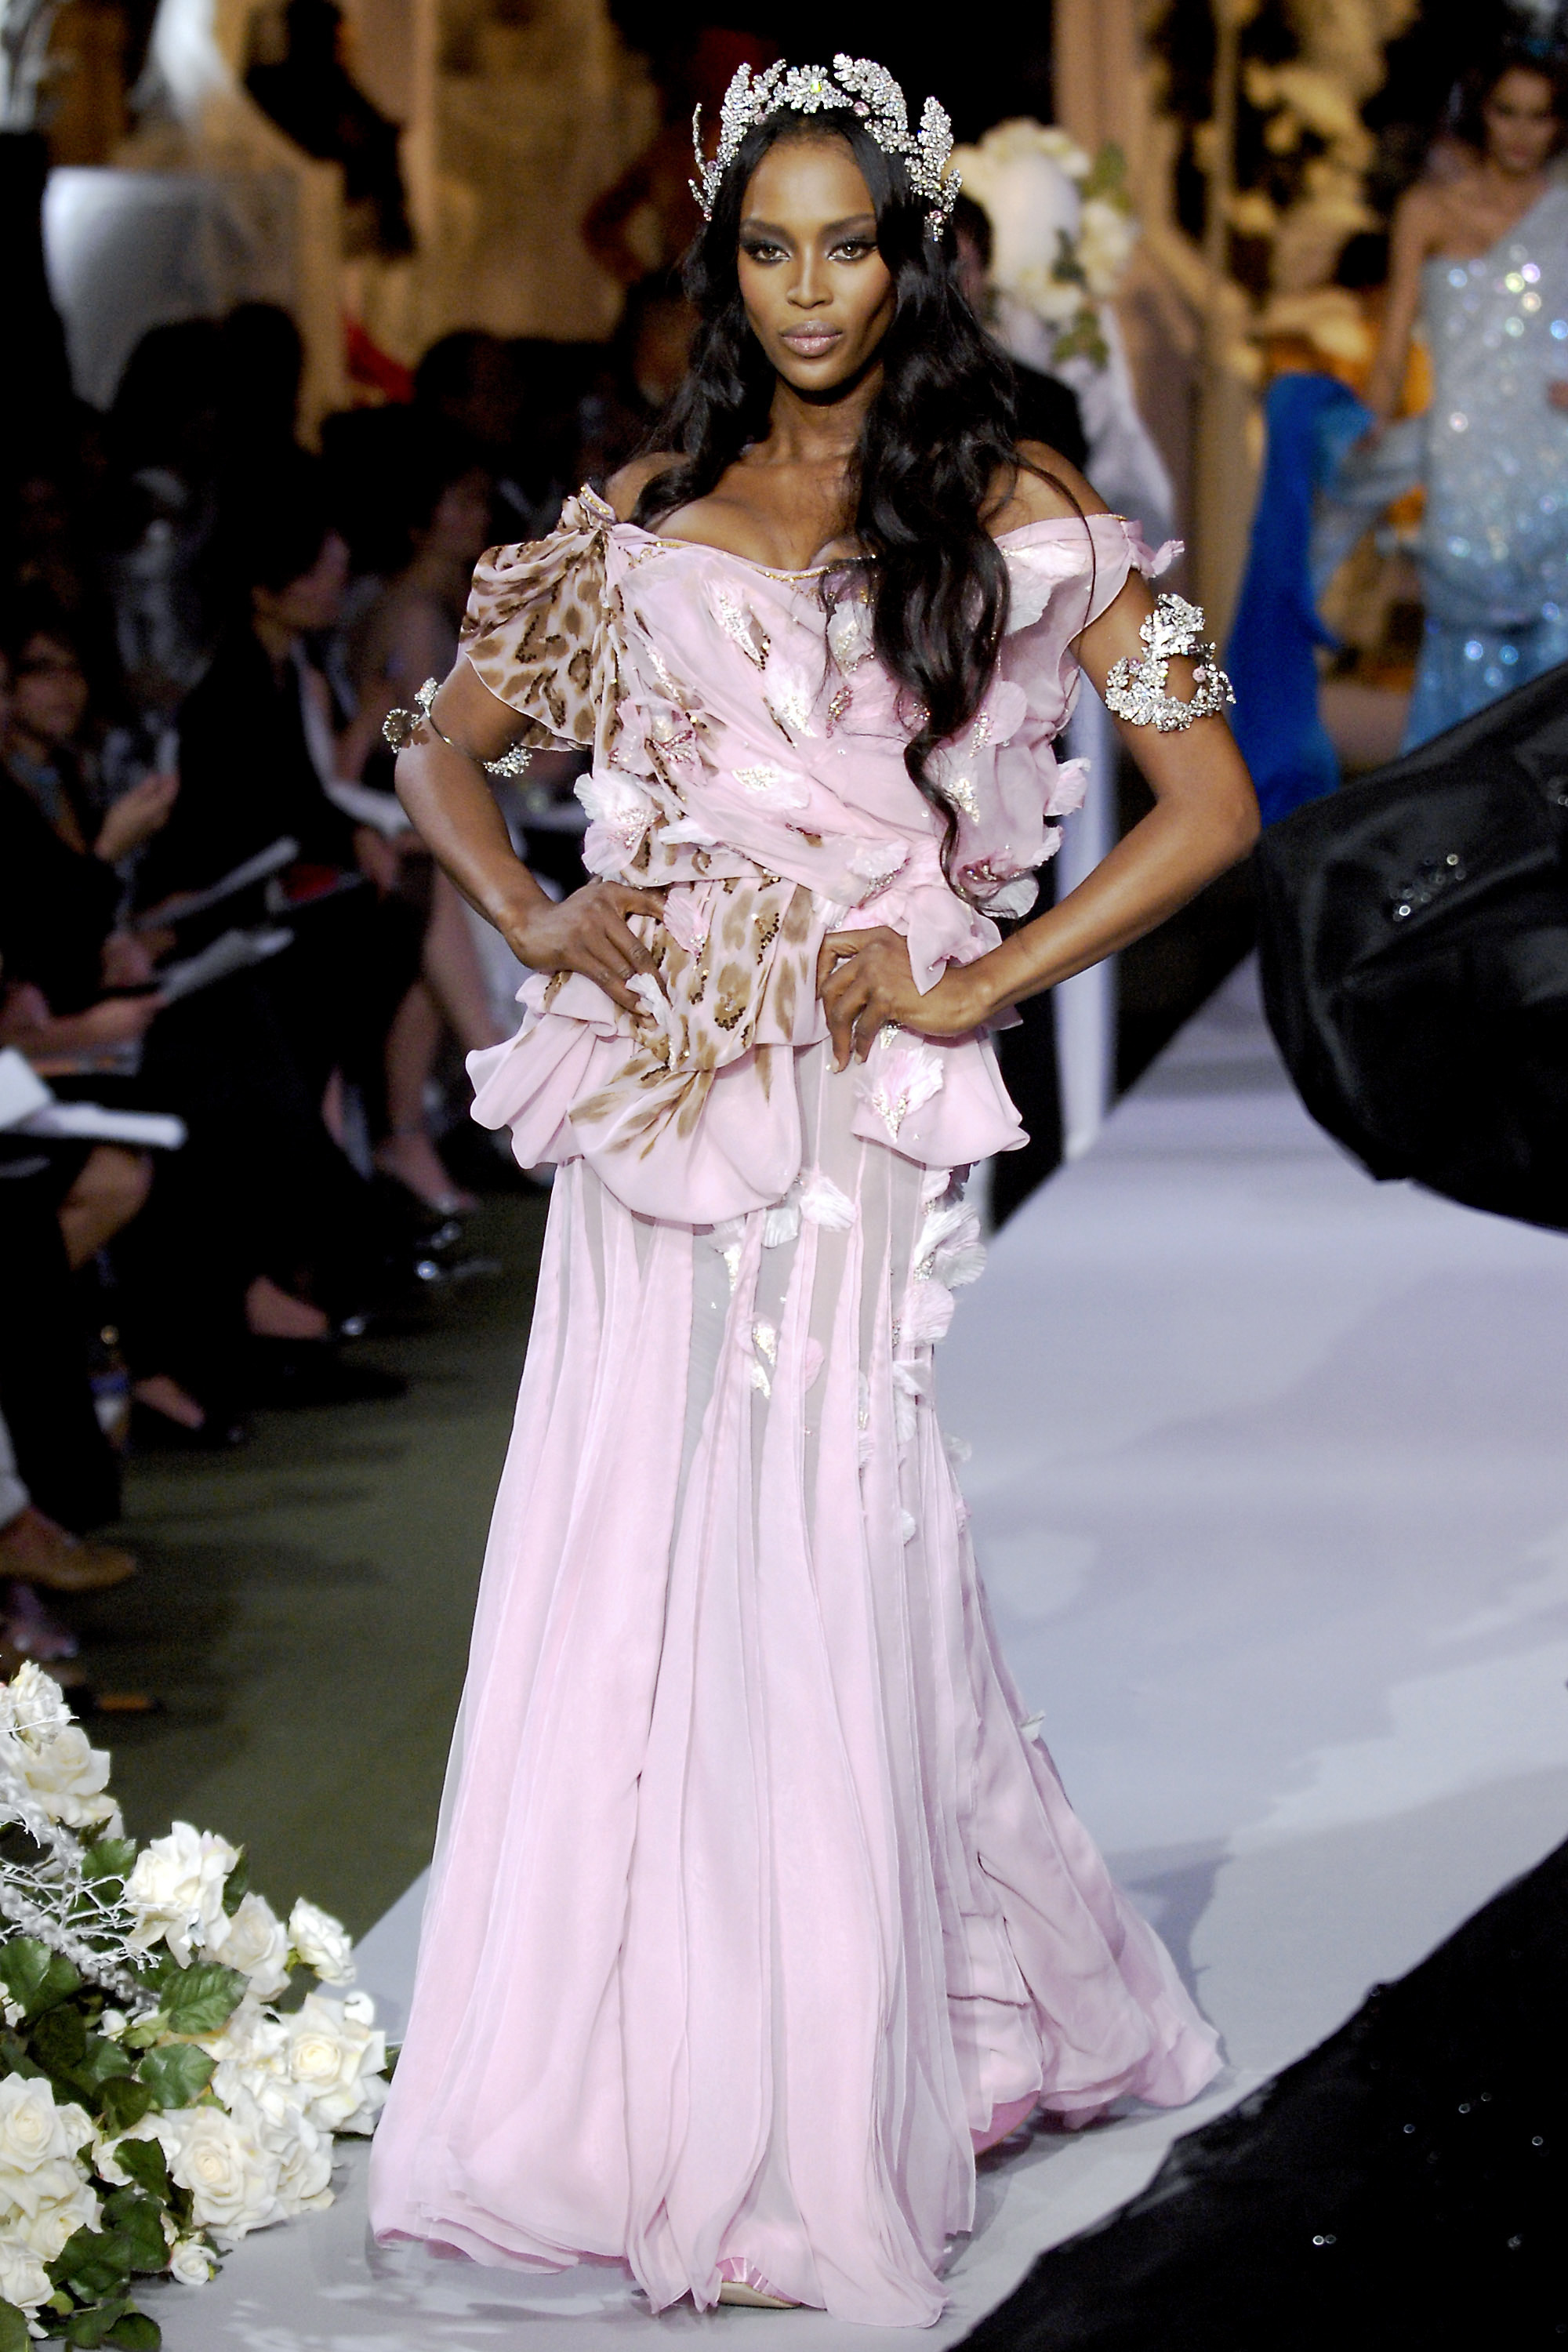 Naomi Campbell's iconic runway moments through the years, Gallery